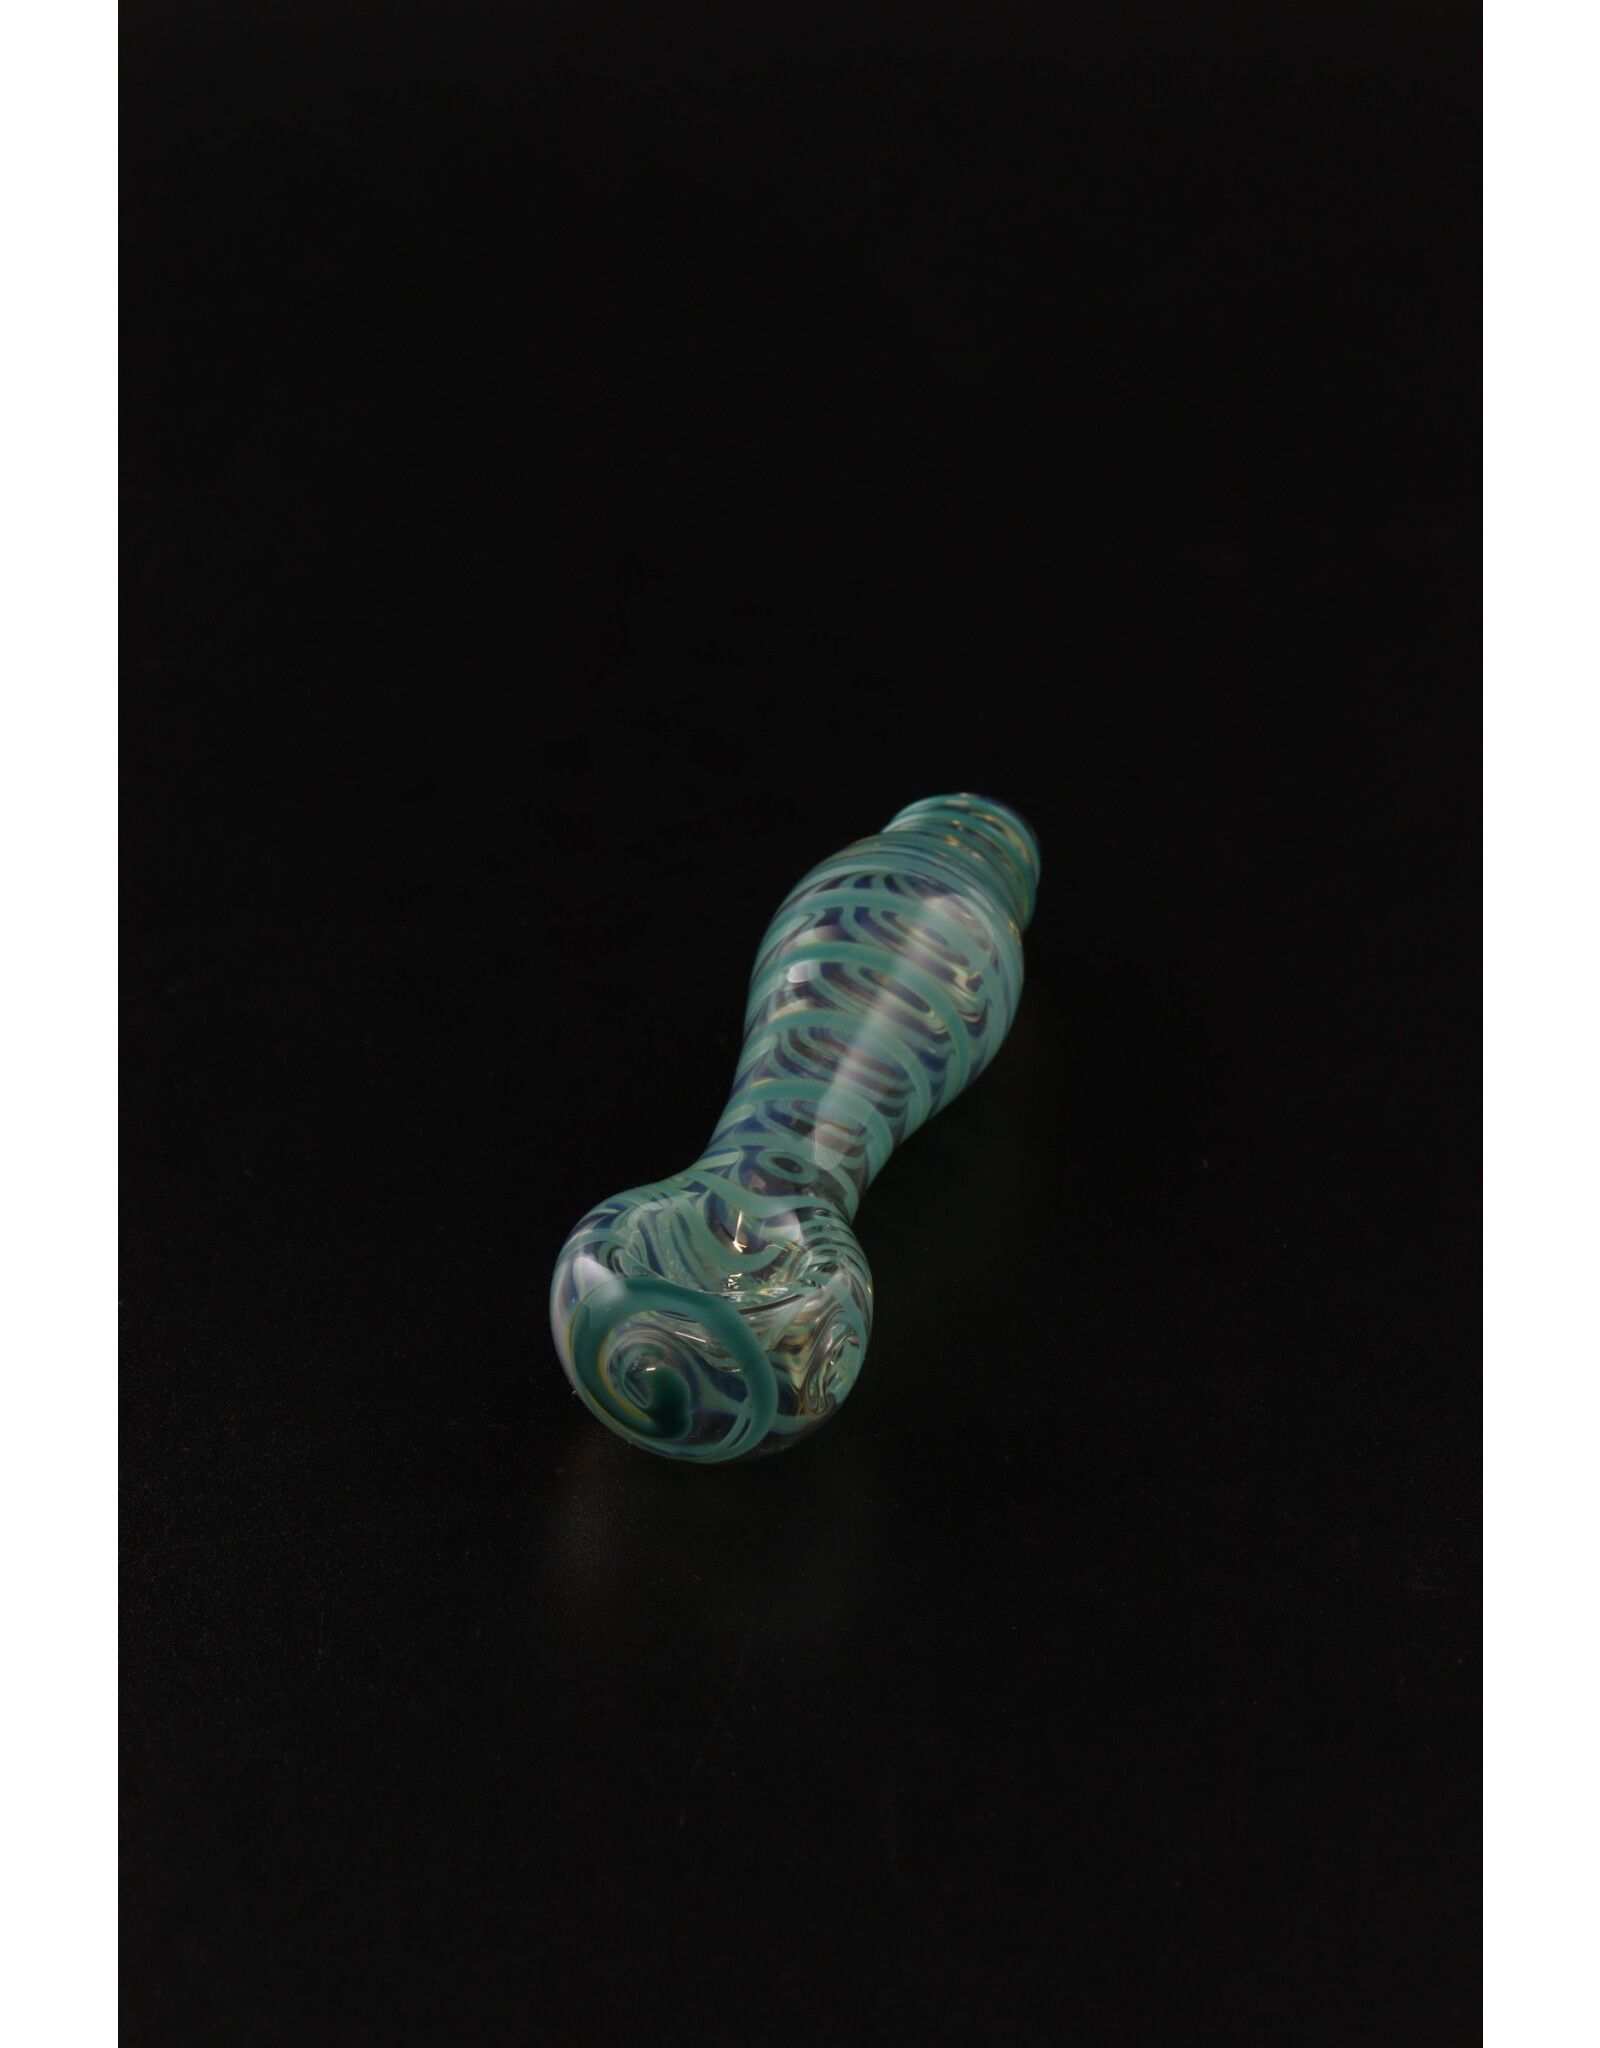 Jellyfish Glass Spun Fat Belly Hand Pipe